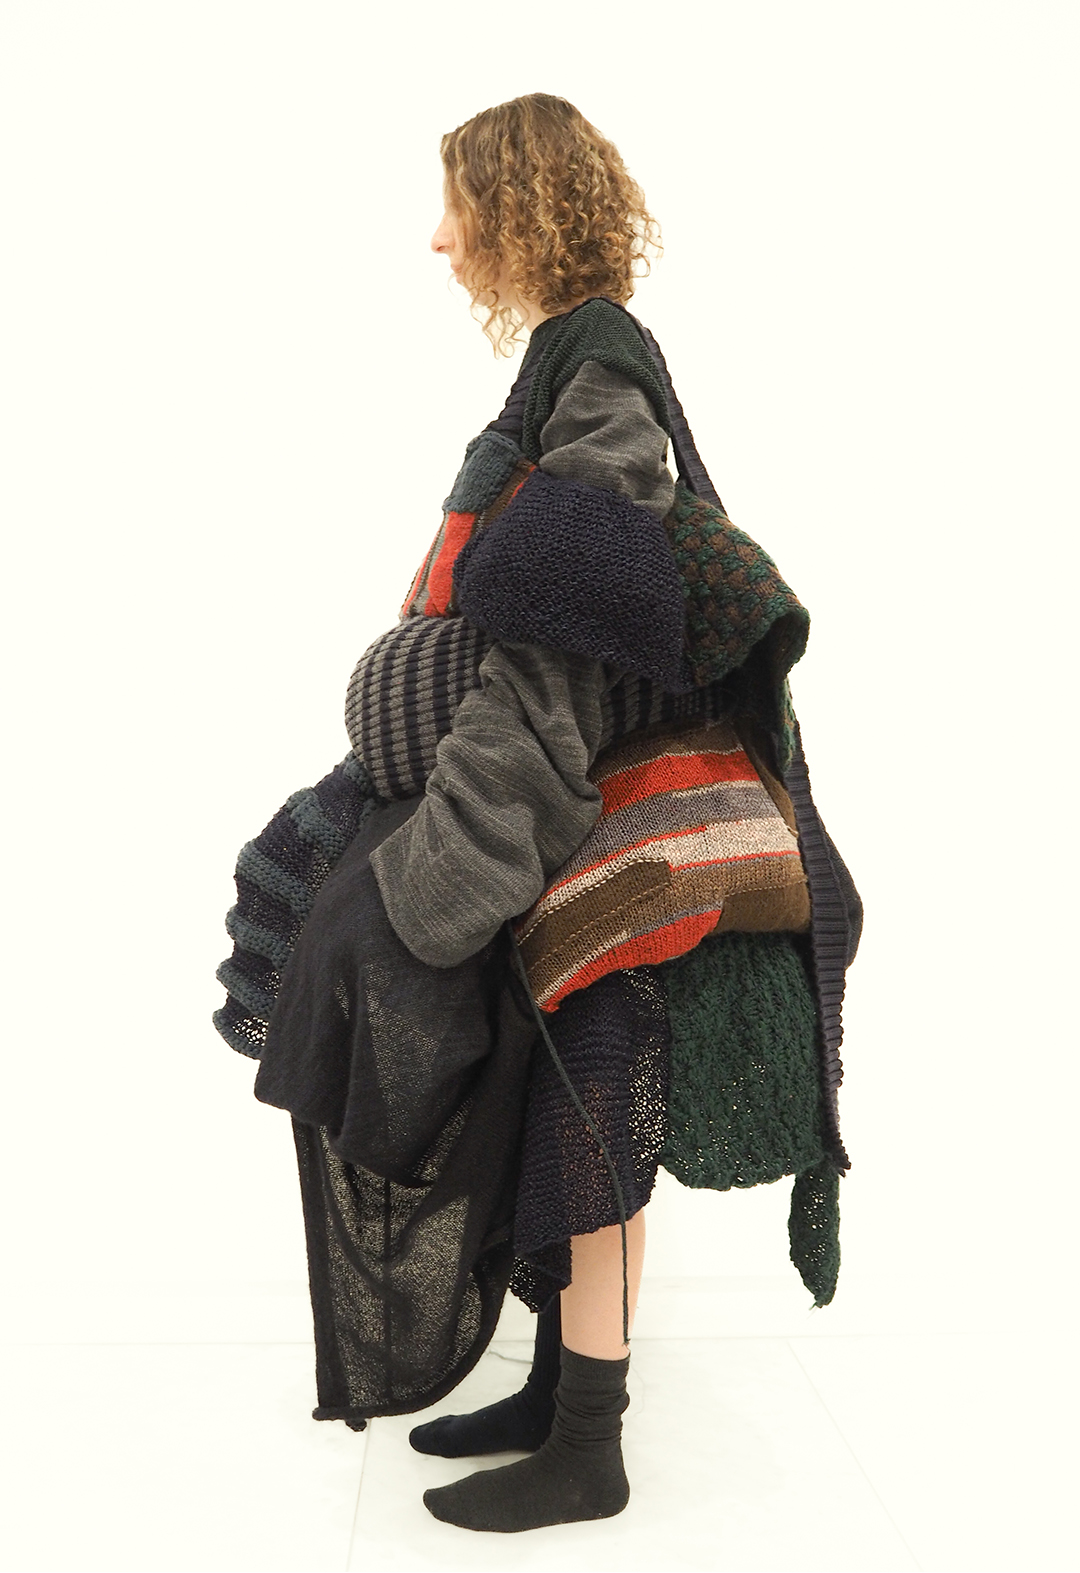 The photo shows a side view of a model wearing a patchwork deconstructed bustle dress with an oversized sleeve top.